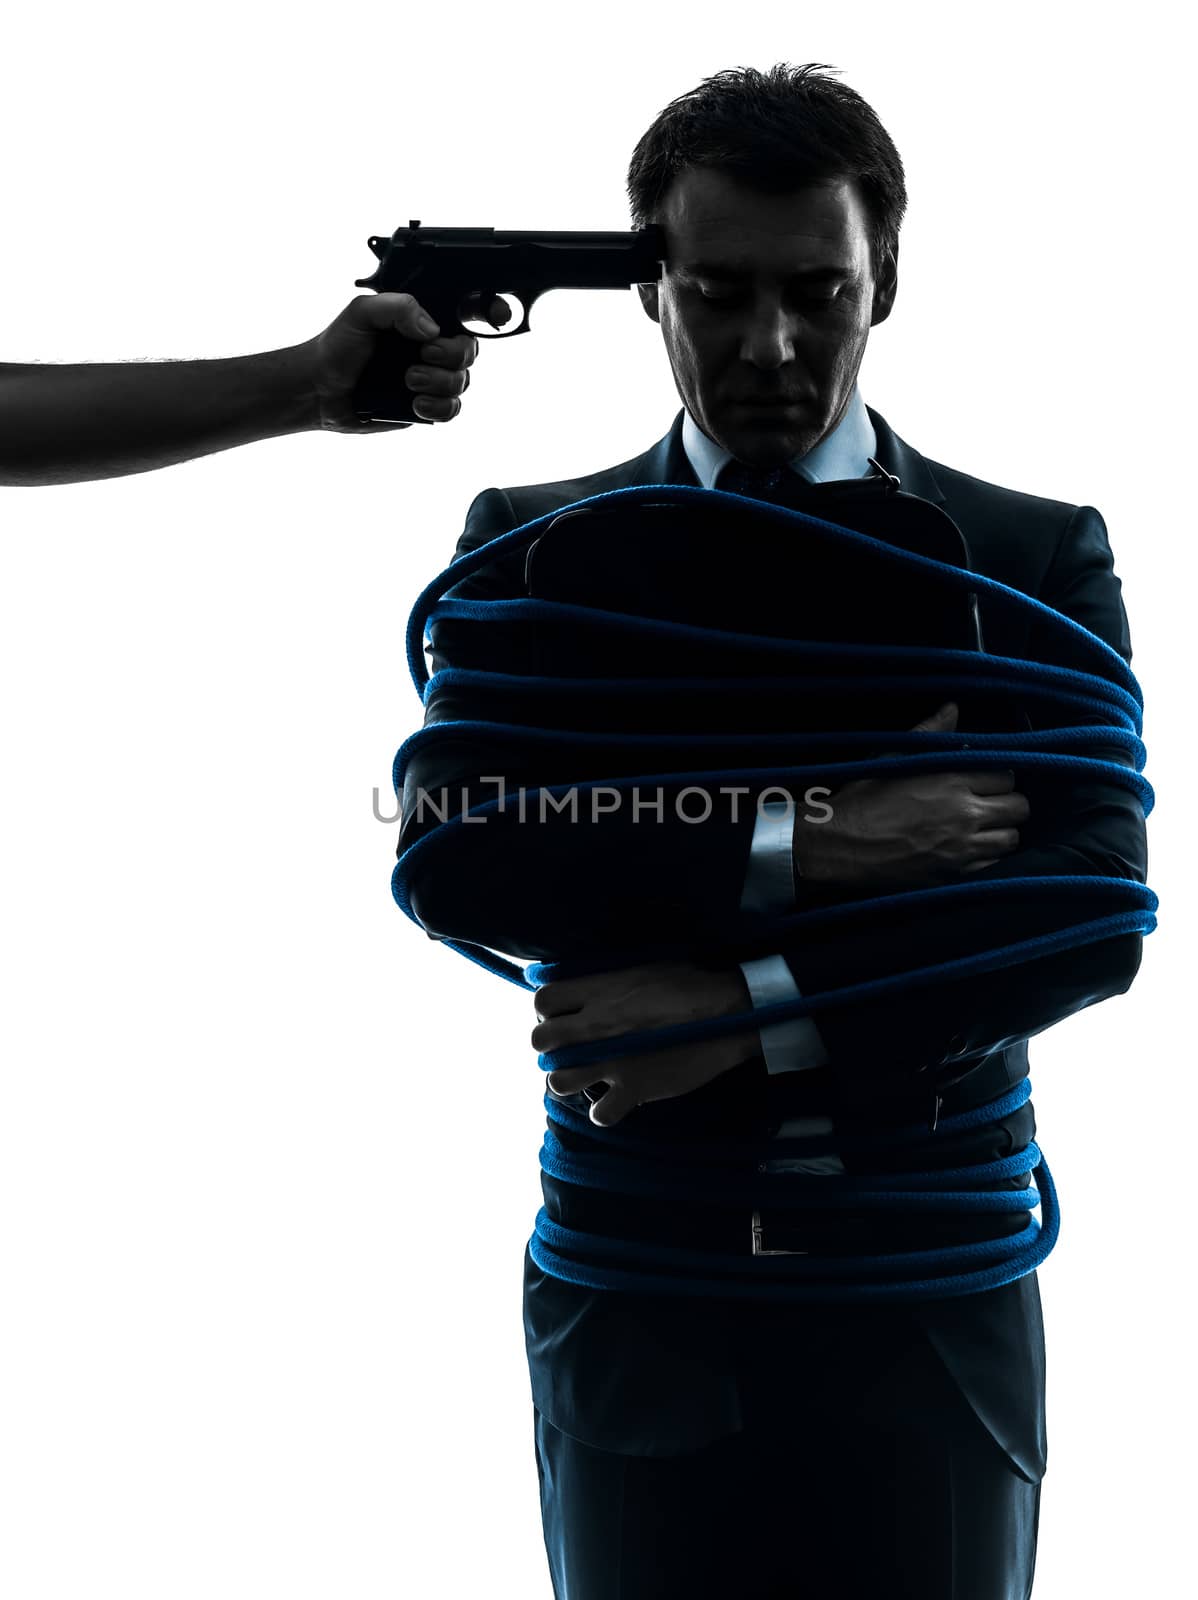 captive hostage business man silhouette by PIXSTILL